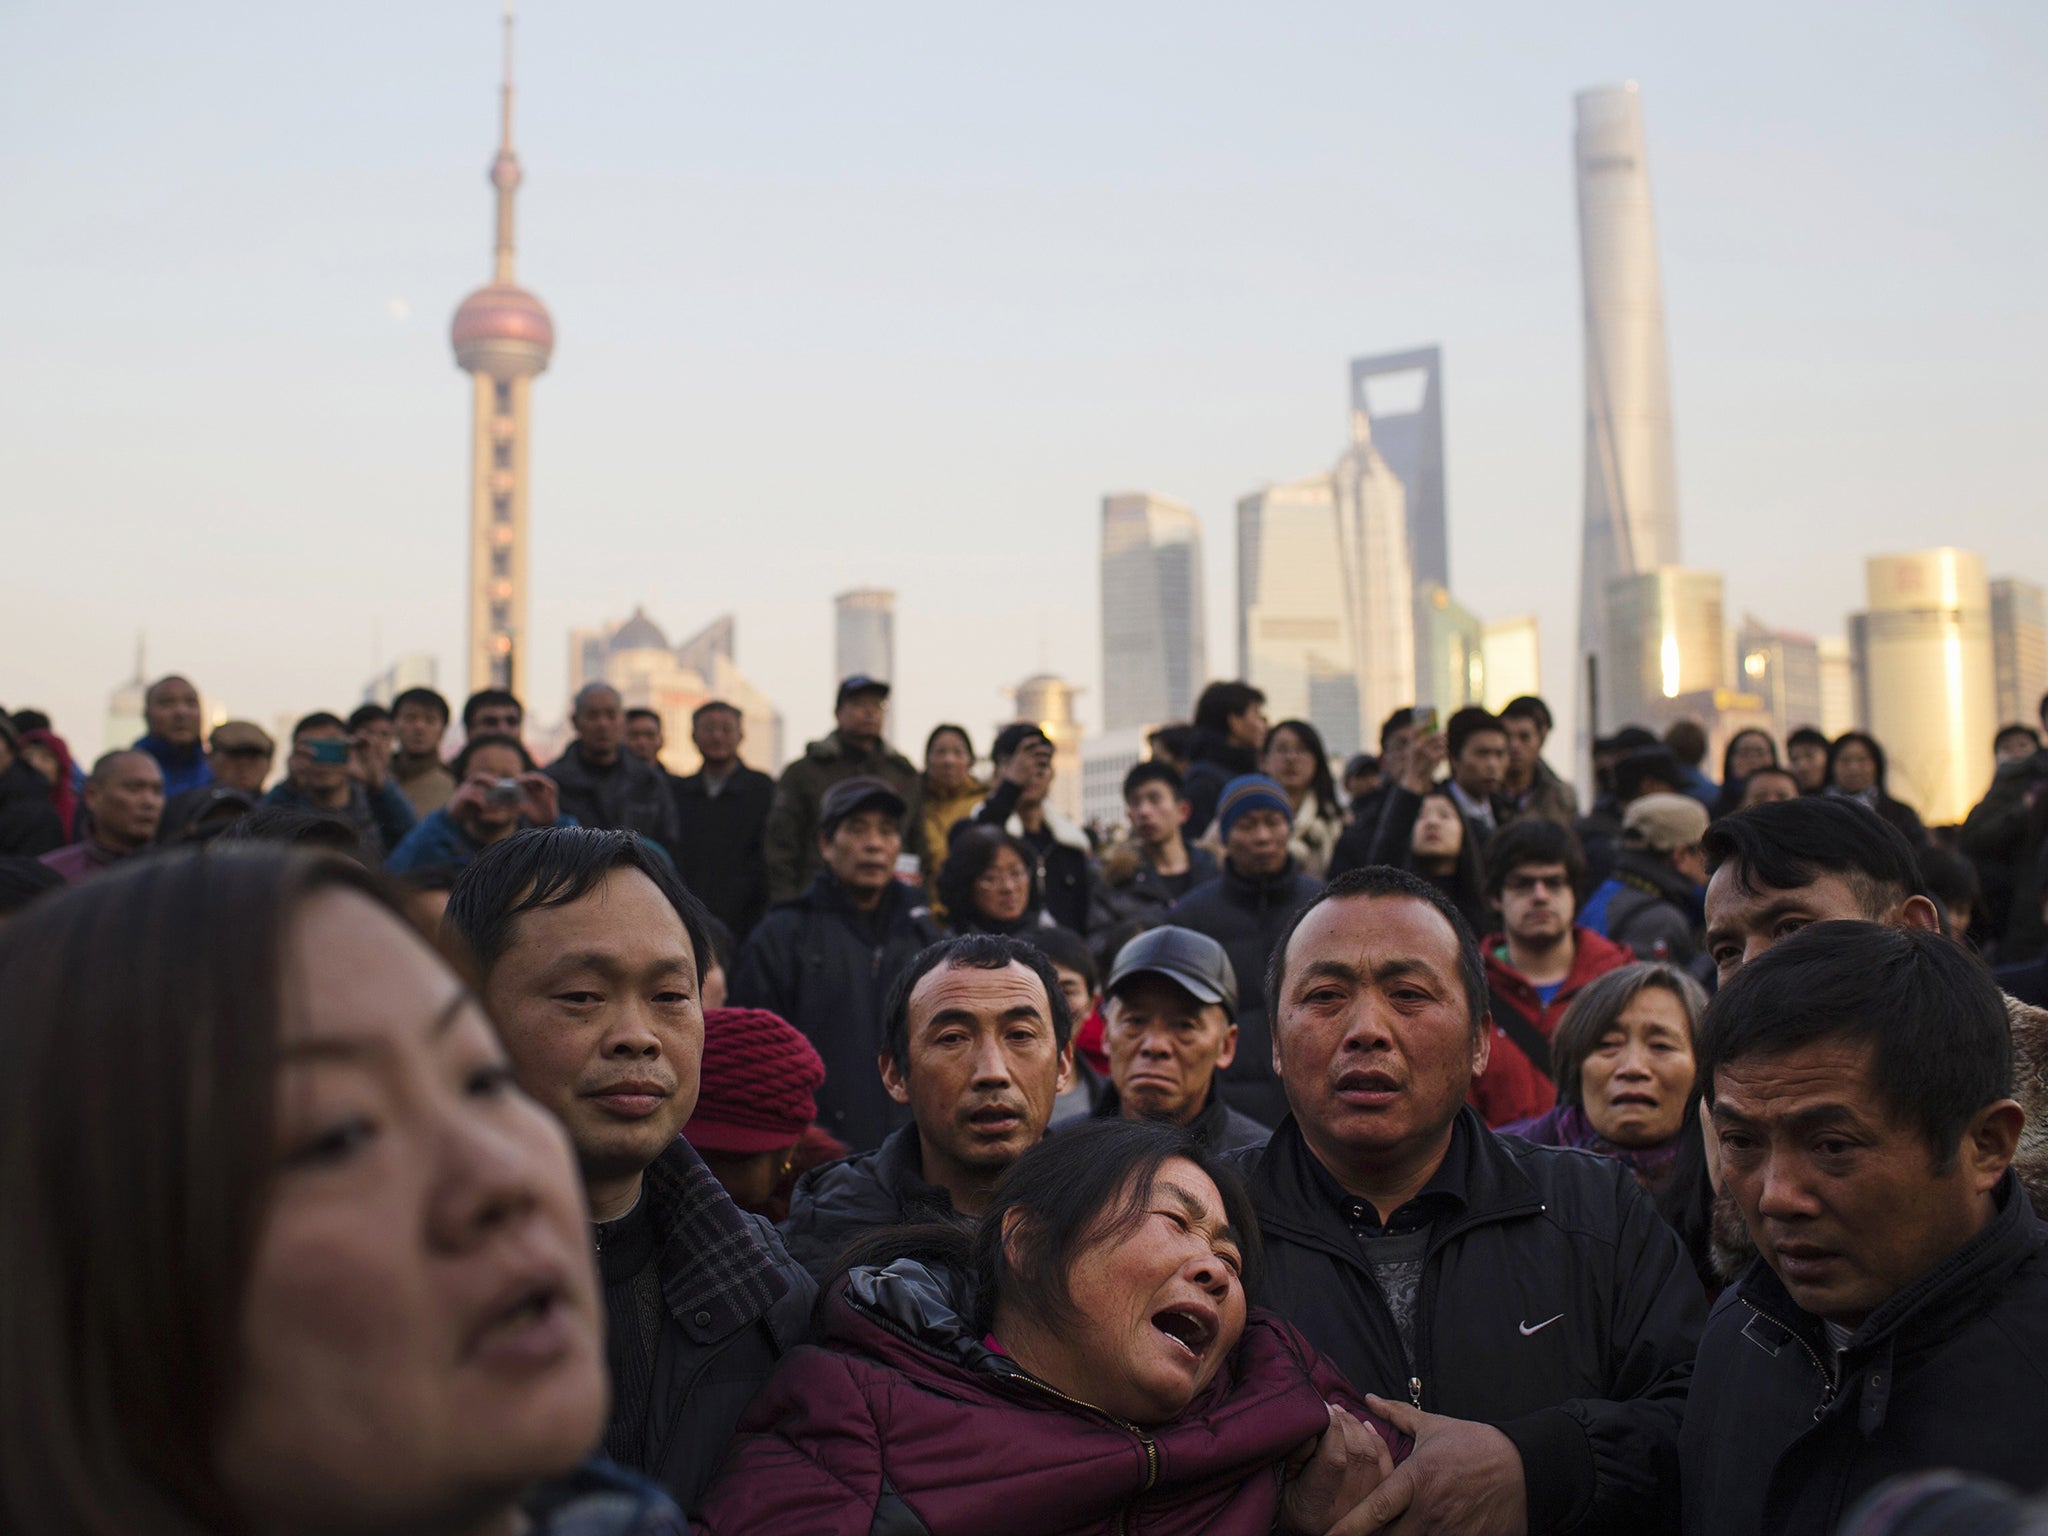 The mother of a victim weeps at the scene of the New Year’s Eve stampede on Shanghai’s
waterfront